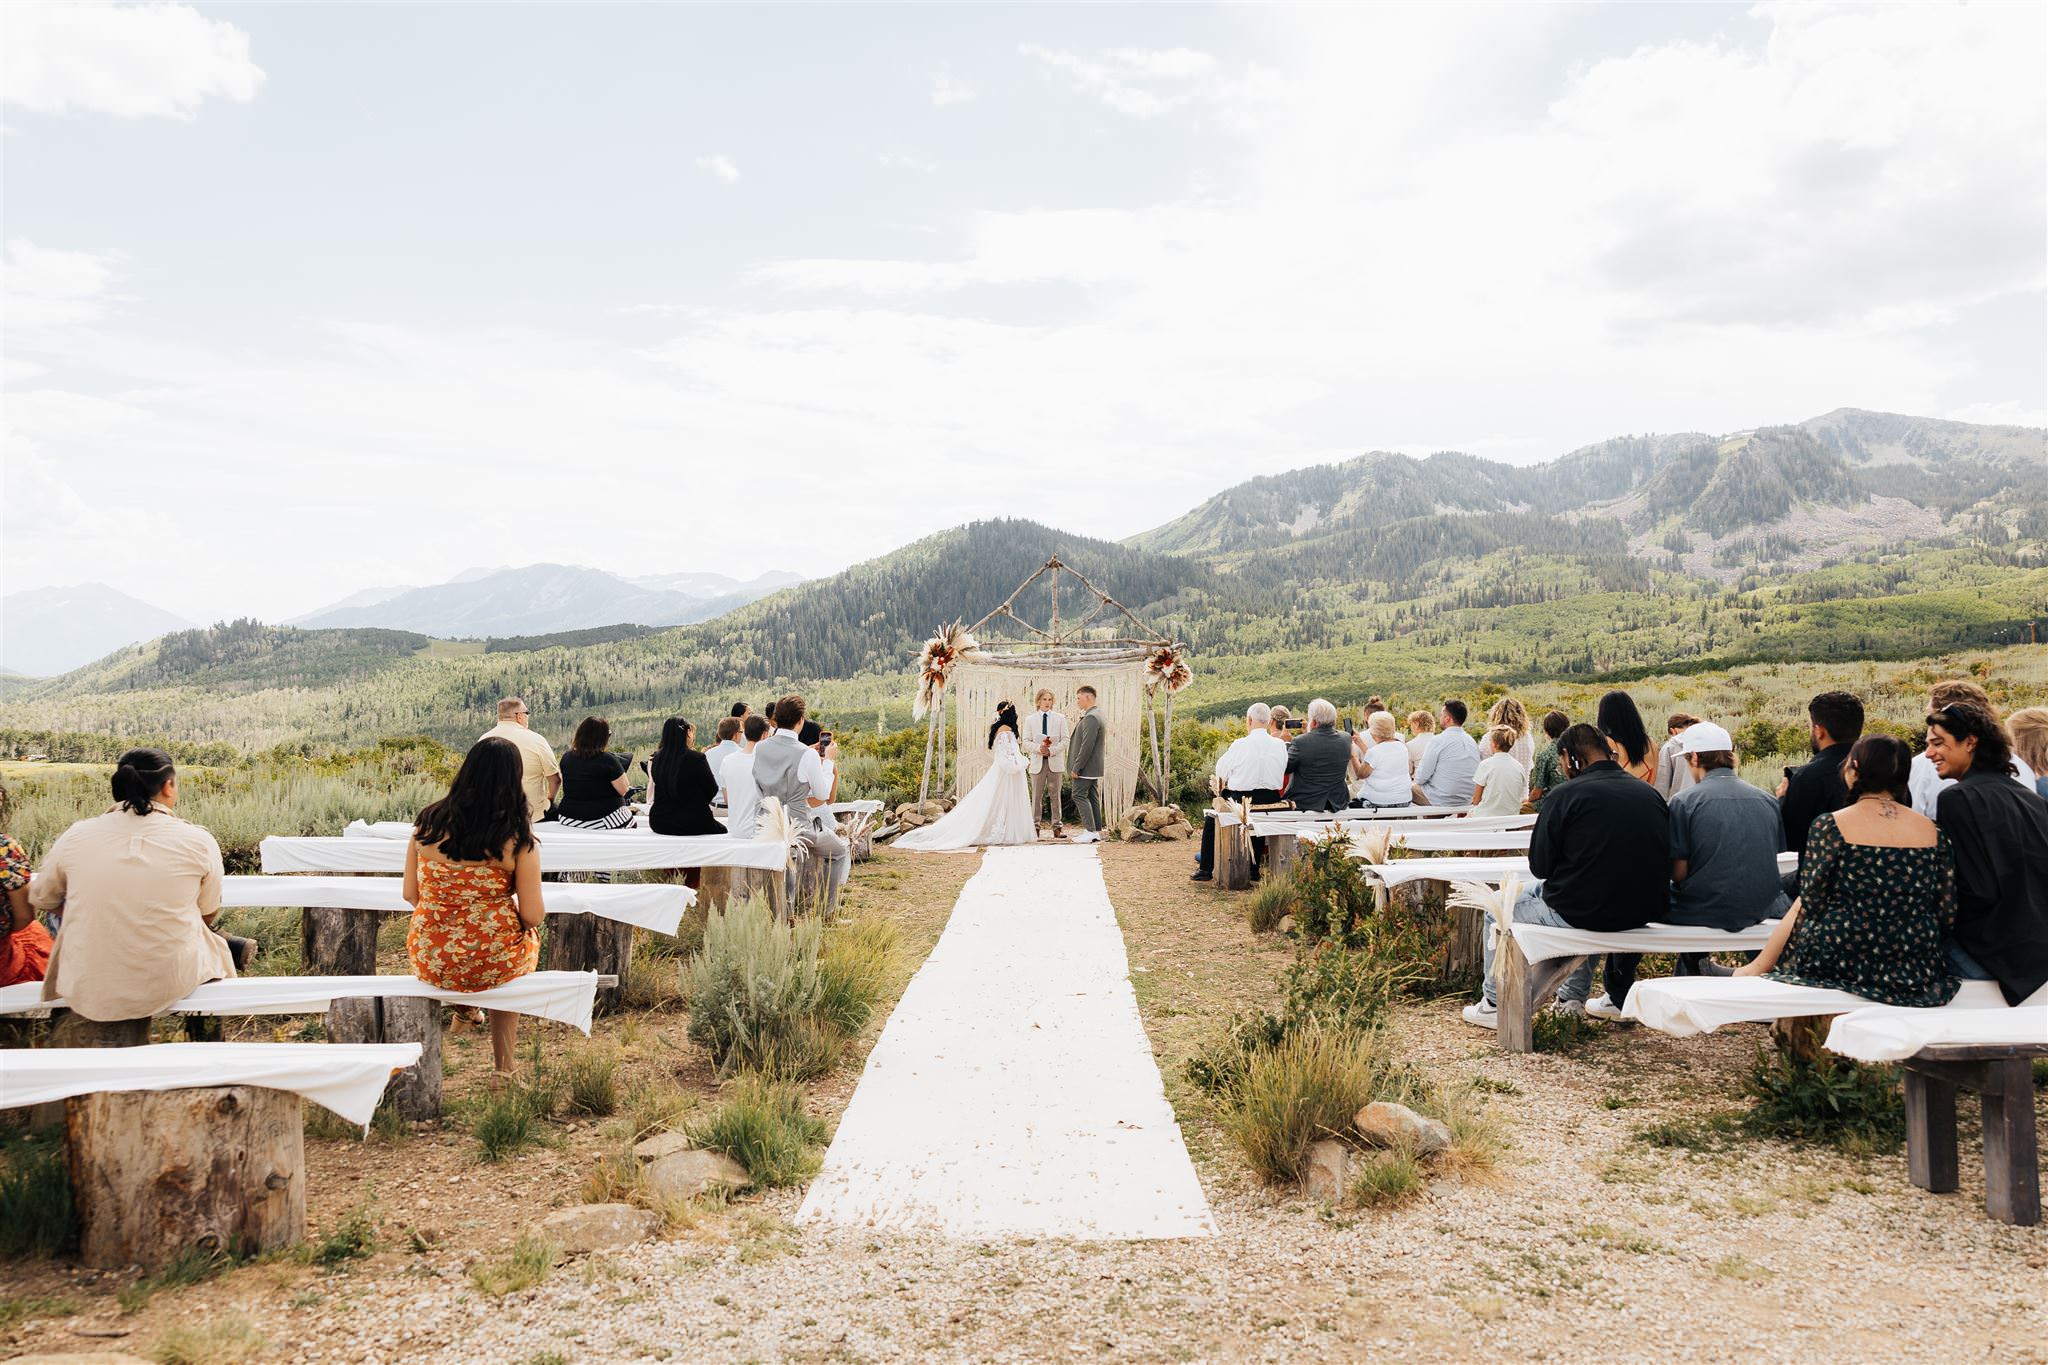 This intimate wedding was located at the Church of Dirt in Park City Utah.